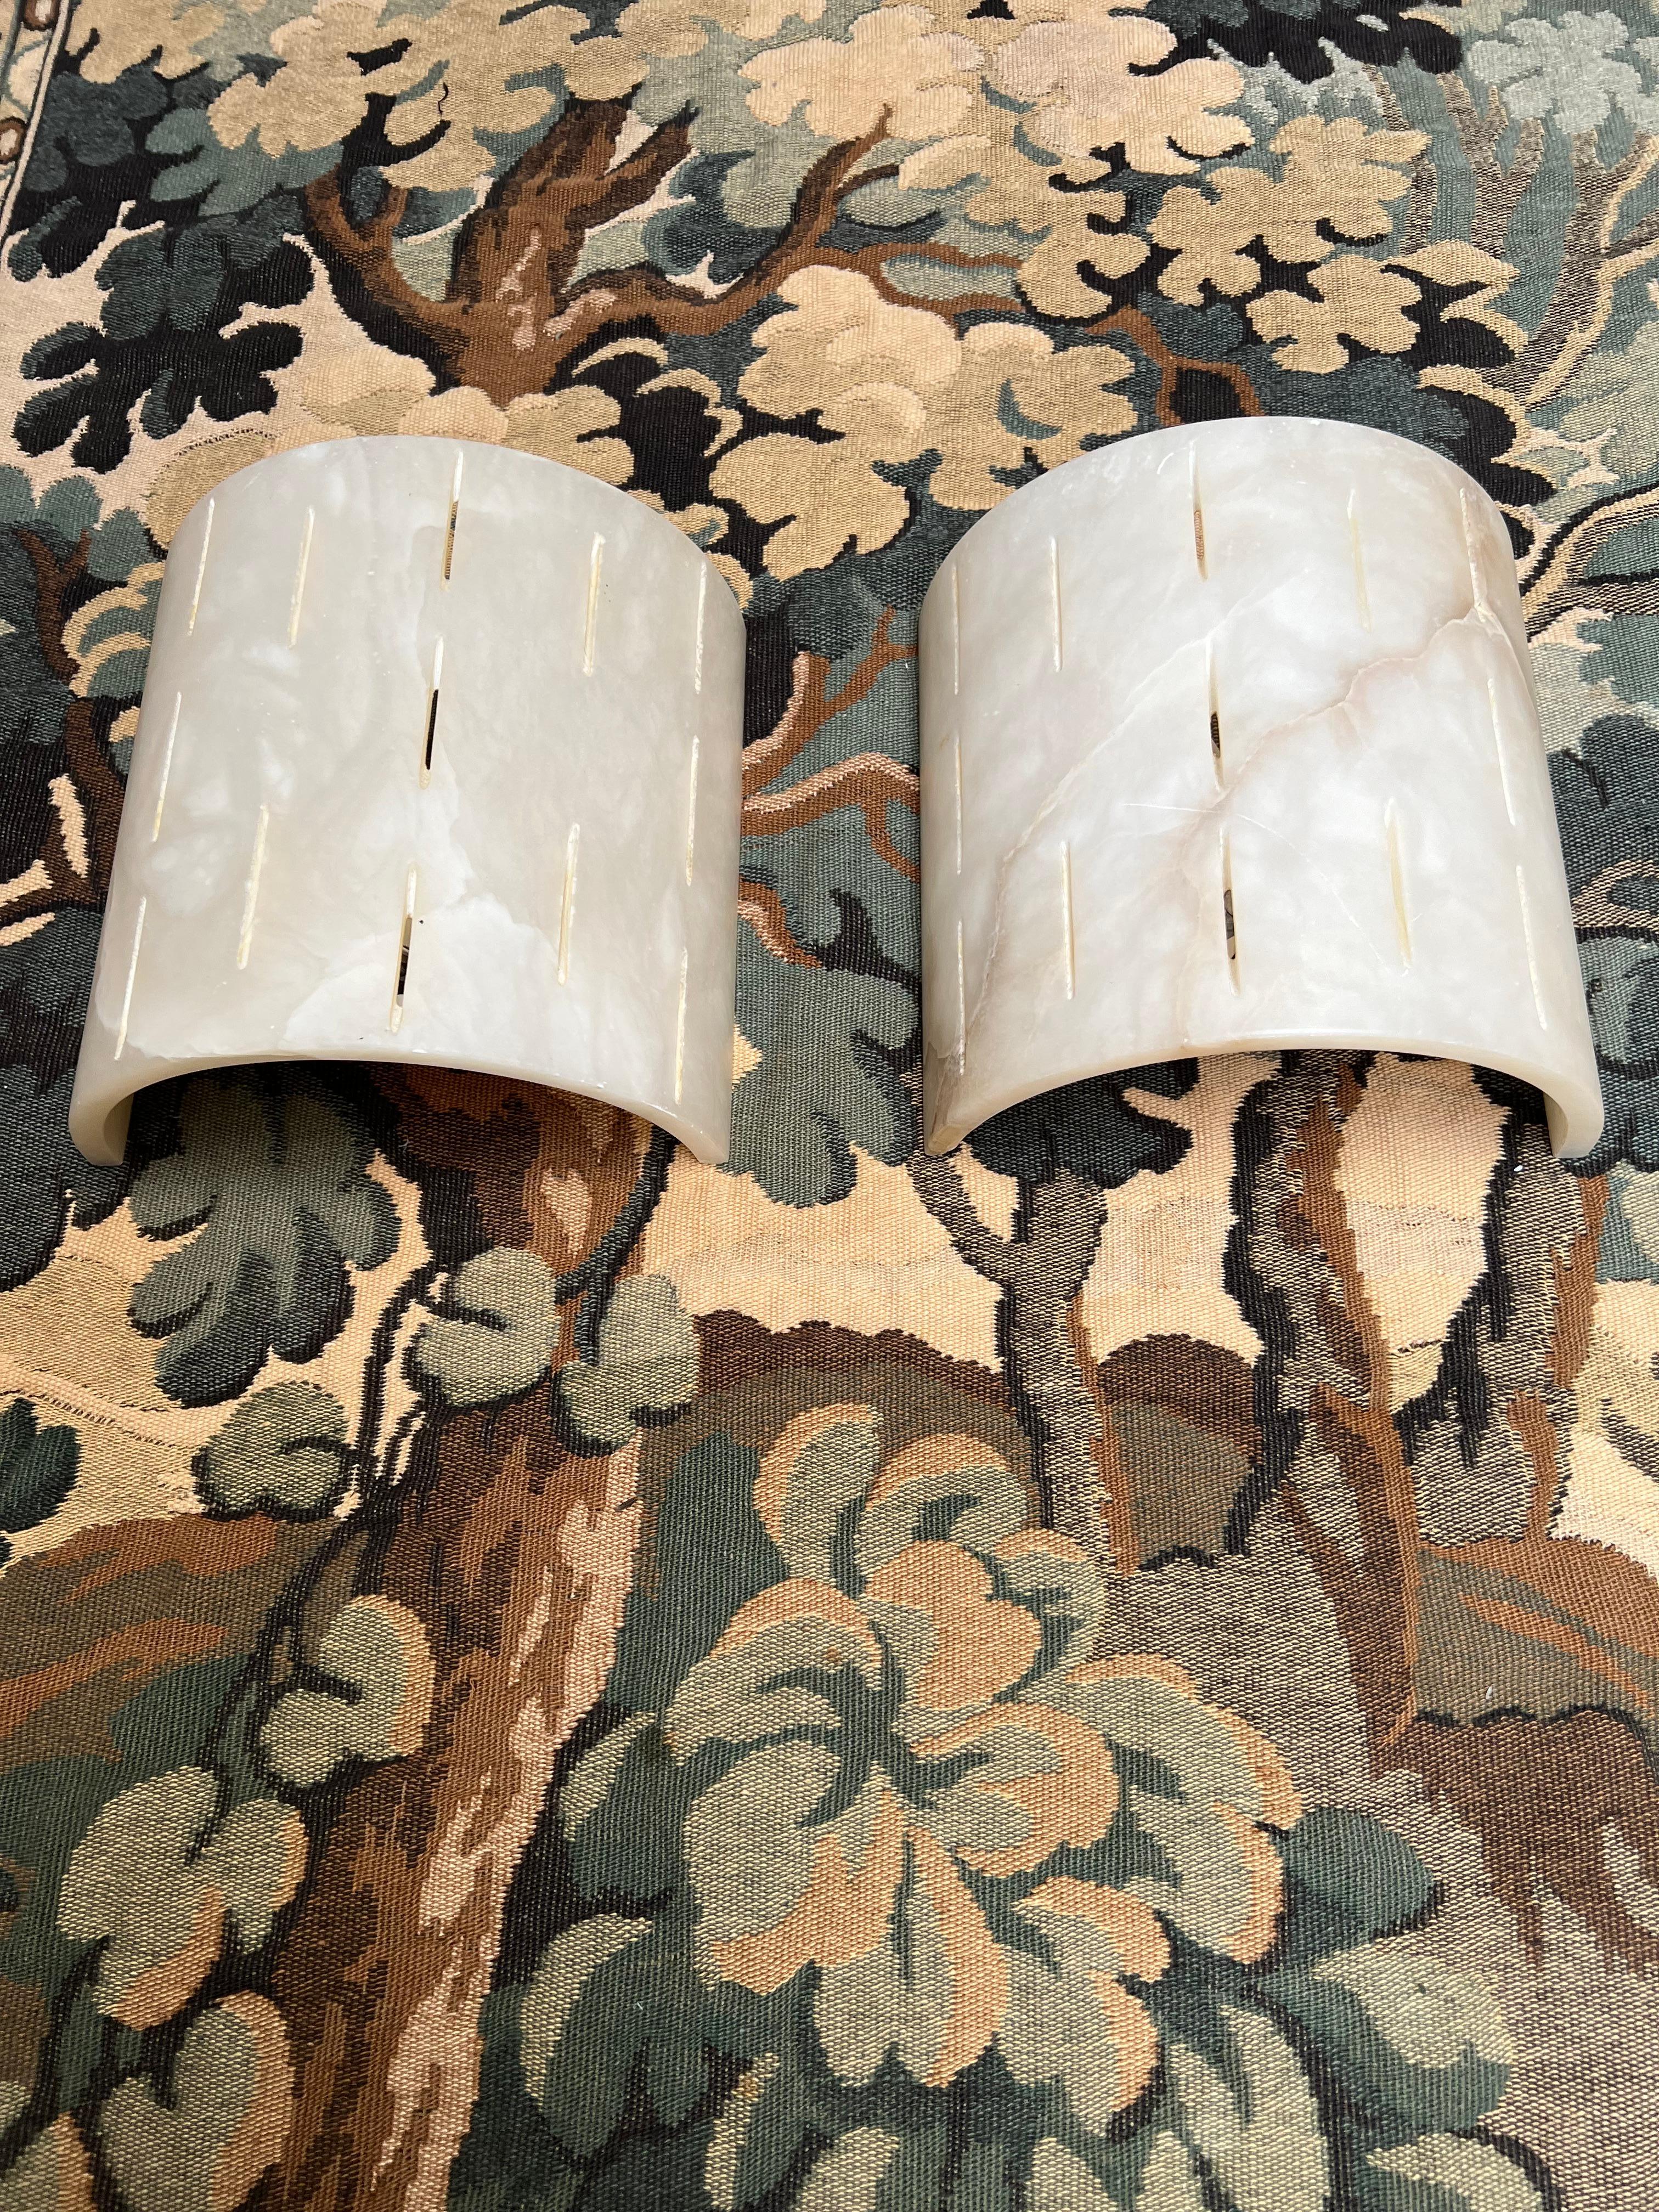 Timeless Design Pair of Art Deco Style Alabaster Wall Sconces / Light Fixtures For Sale 5